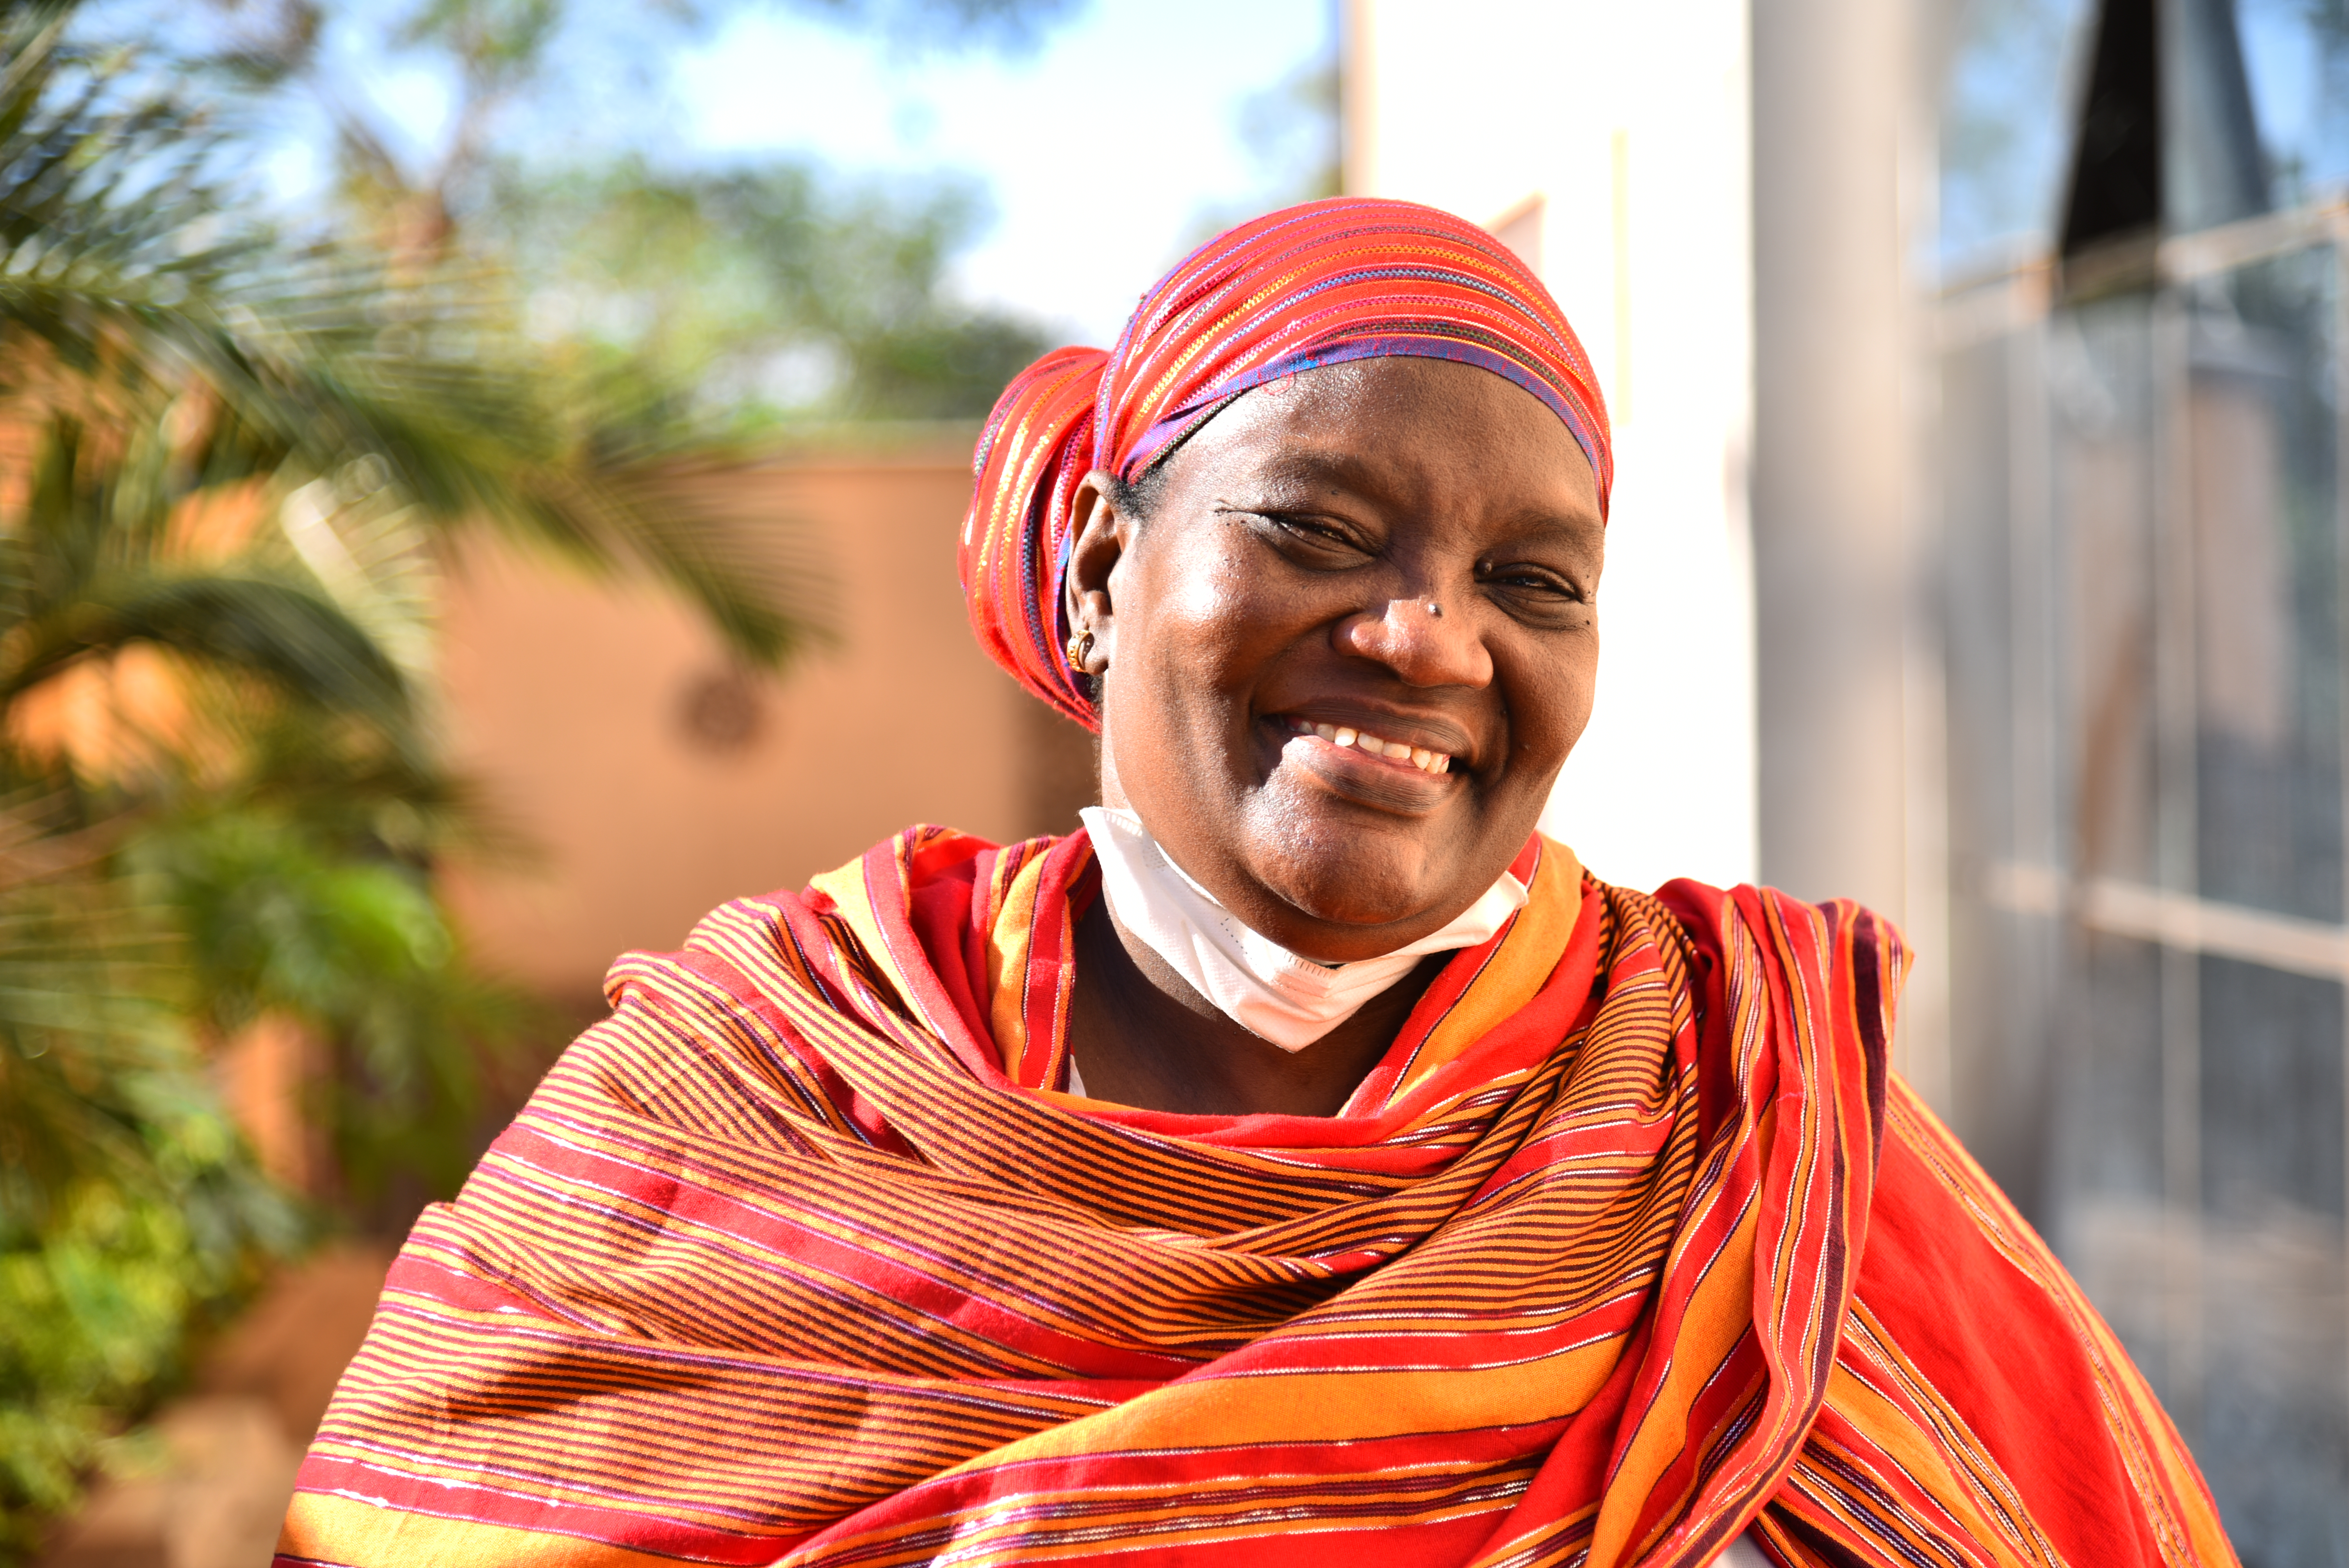 Shamsa Abubakar is a Kenyan peacebuilder and the first Chairlady of the newly established National Women’s Peace Committee Network in Kenya, supported by UN Women. She is a passionate community leader in Mombasa, a coastal city in south-eastern Kenya, and has made it her mission to reform delinquent youths and steer them away from violent criminal gangs and extremist groups - the biggest threat to peace. 